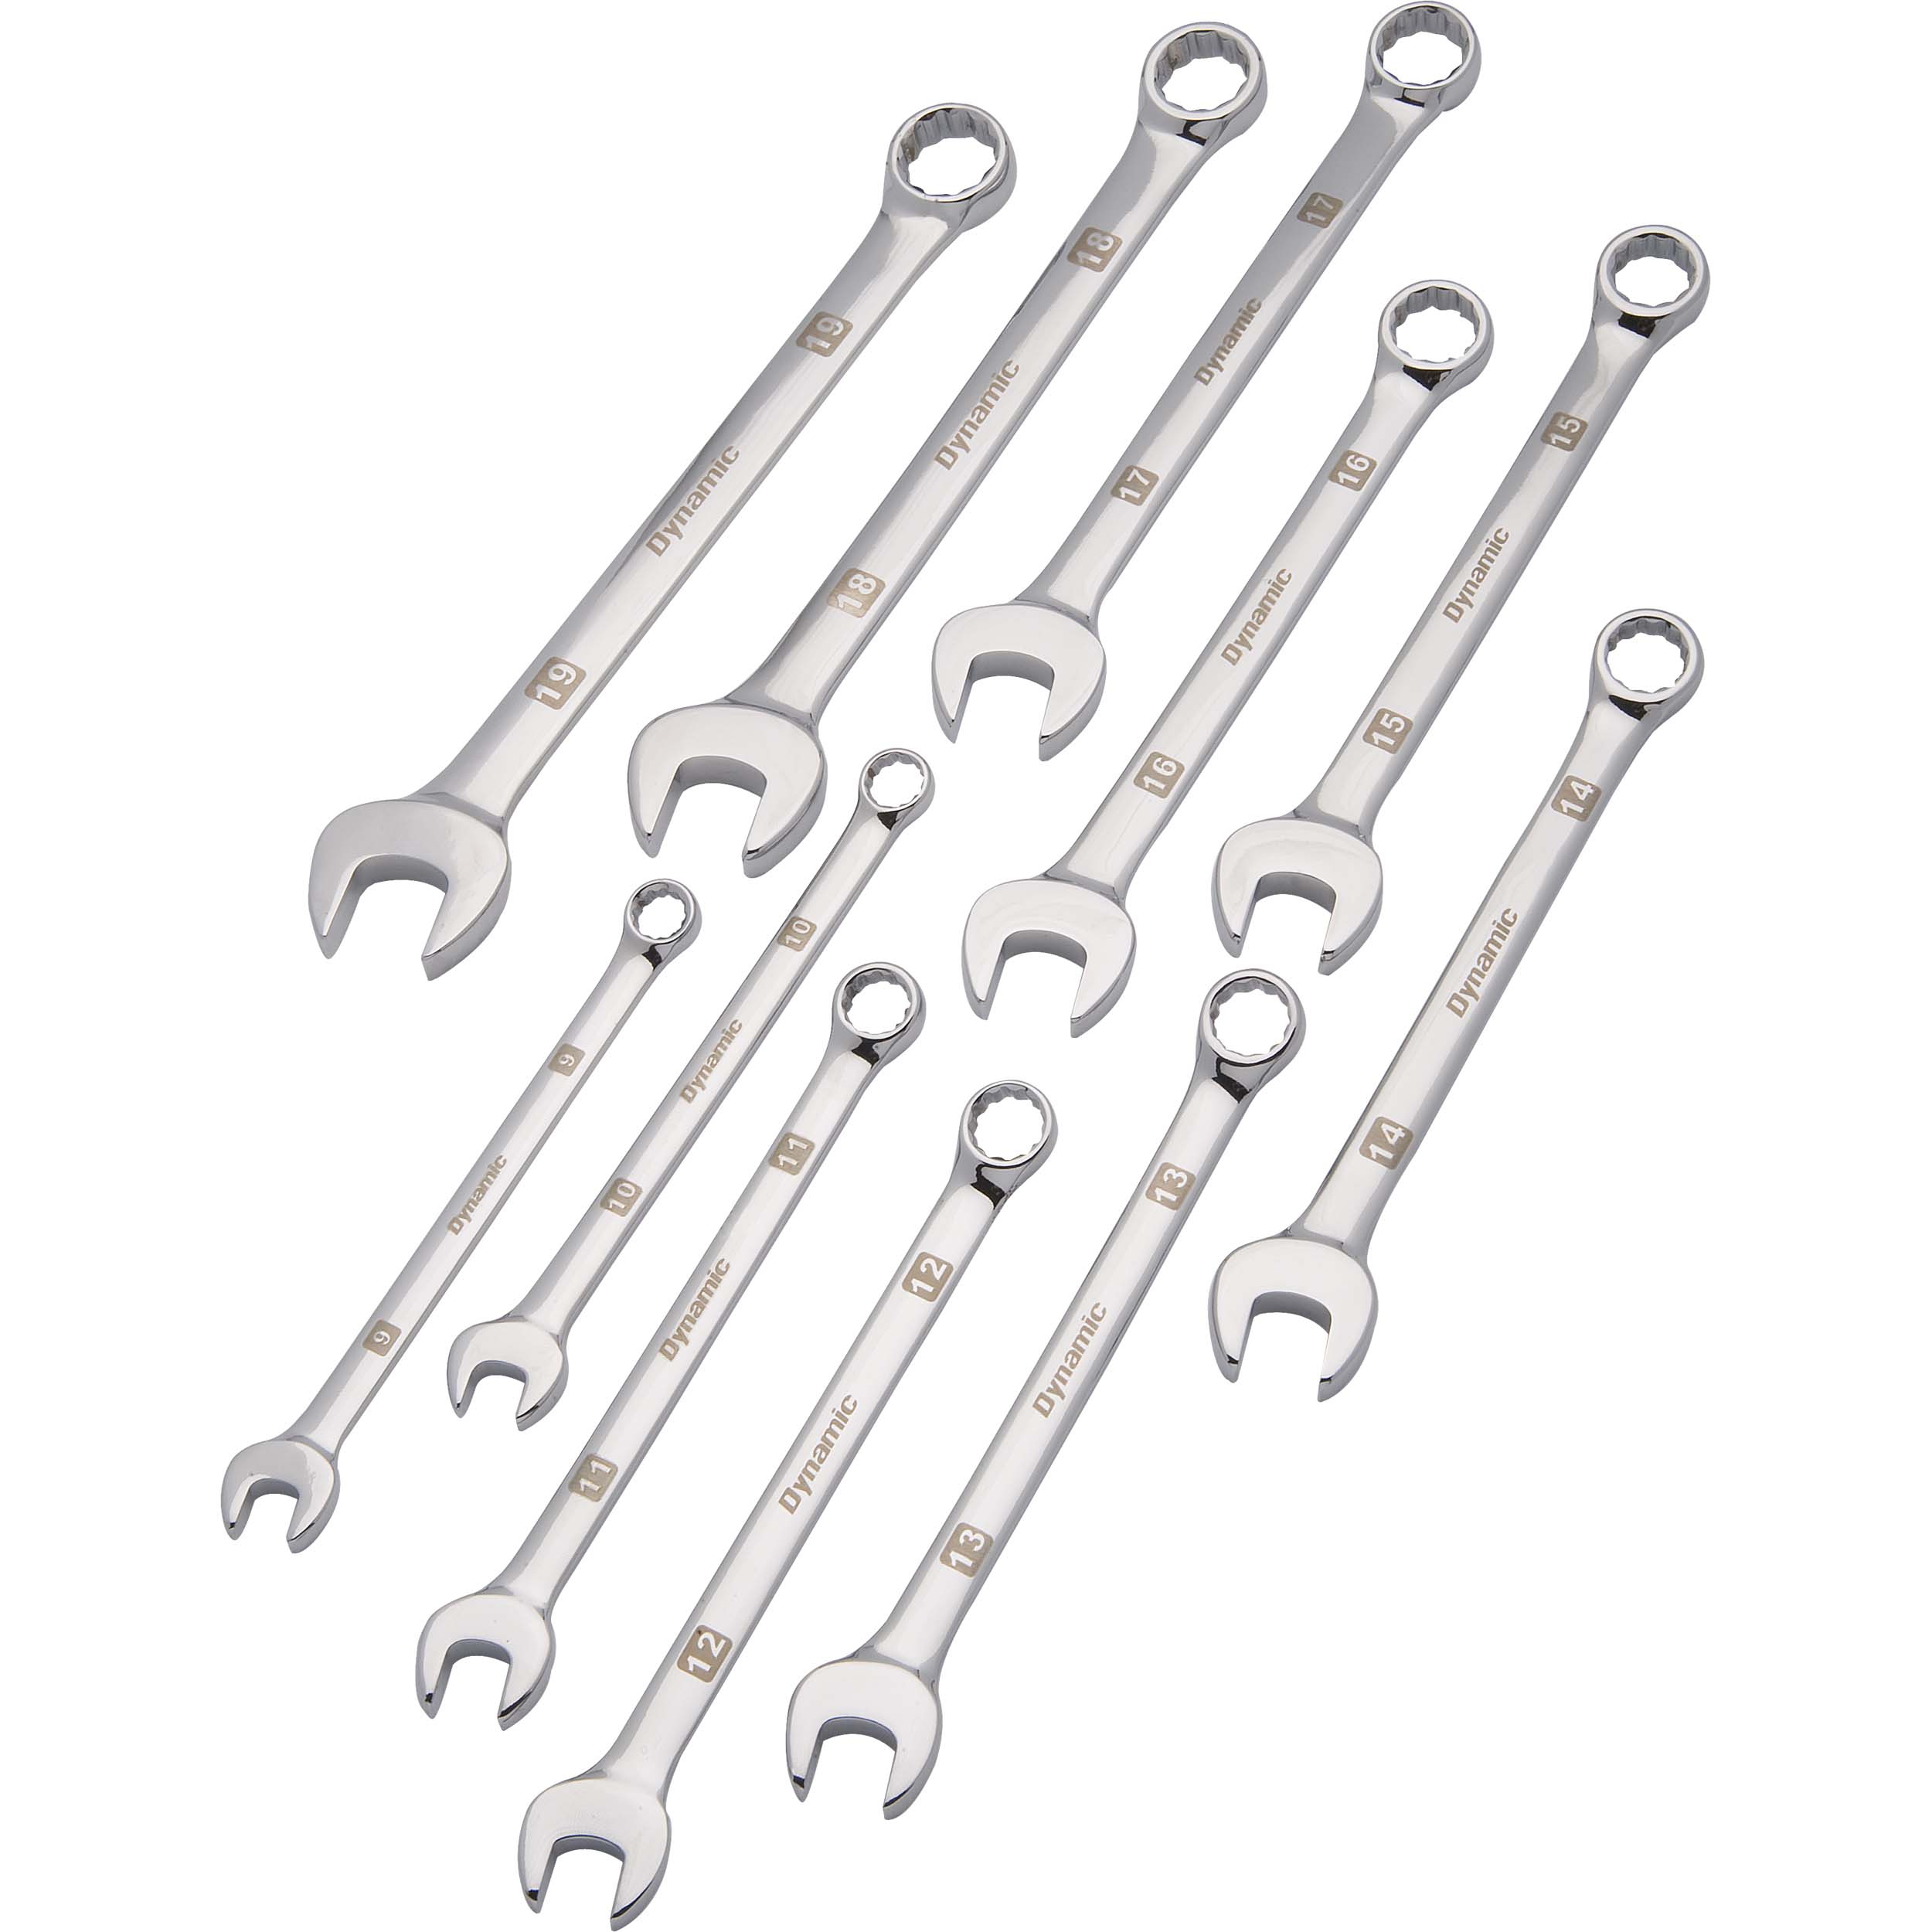 Tools 11pc Metric Combination Wrench Set With Mirror Chrome Finish, 9mm - 19mm